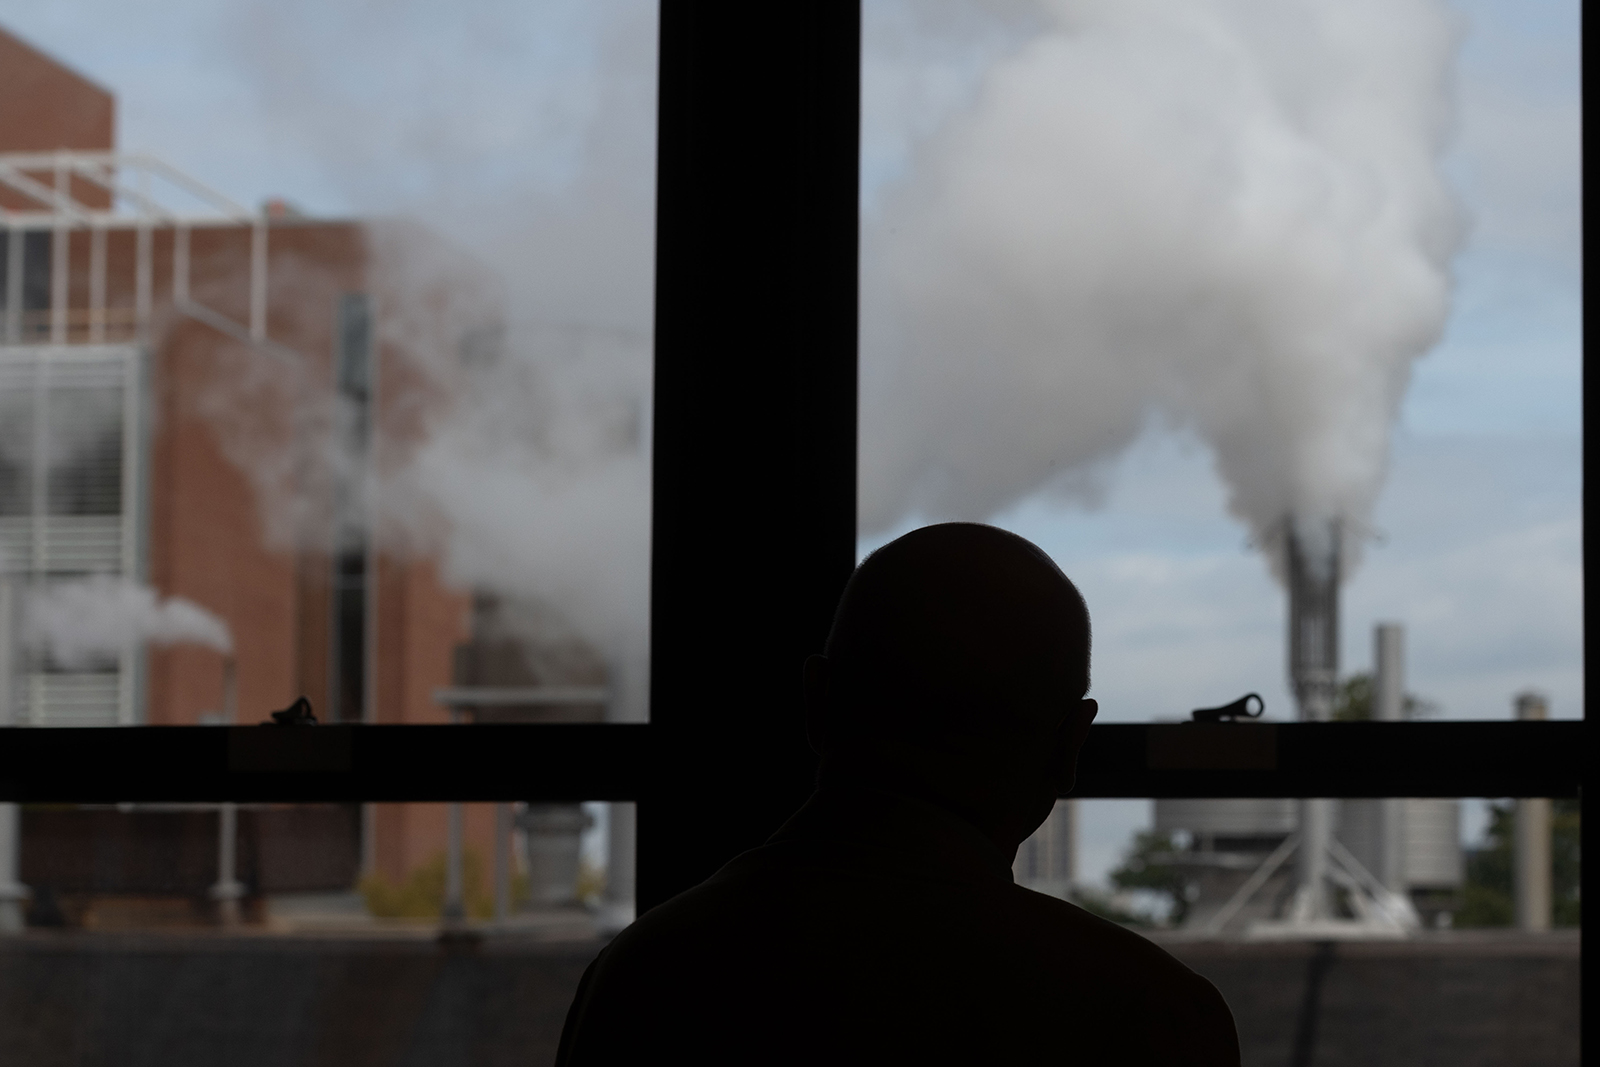 Colin Potts looks at the steam whistle from his office window